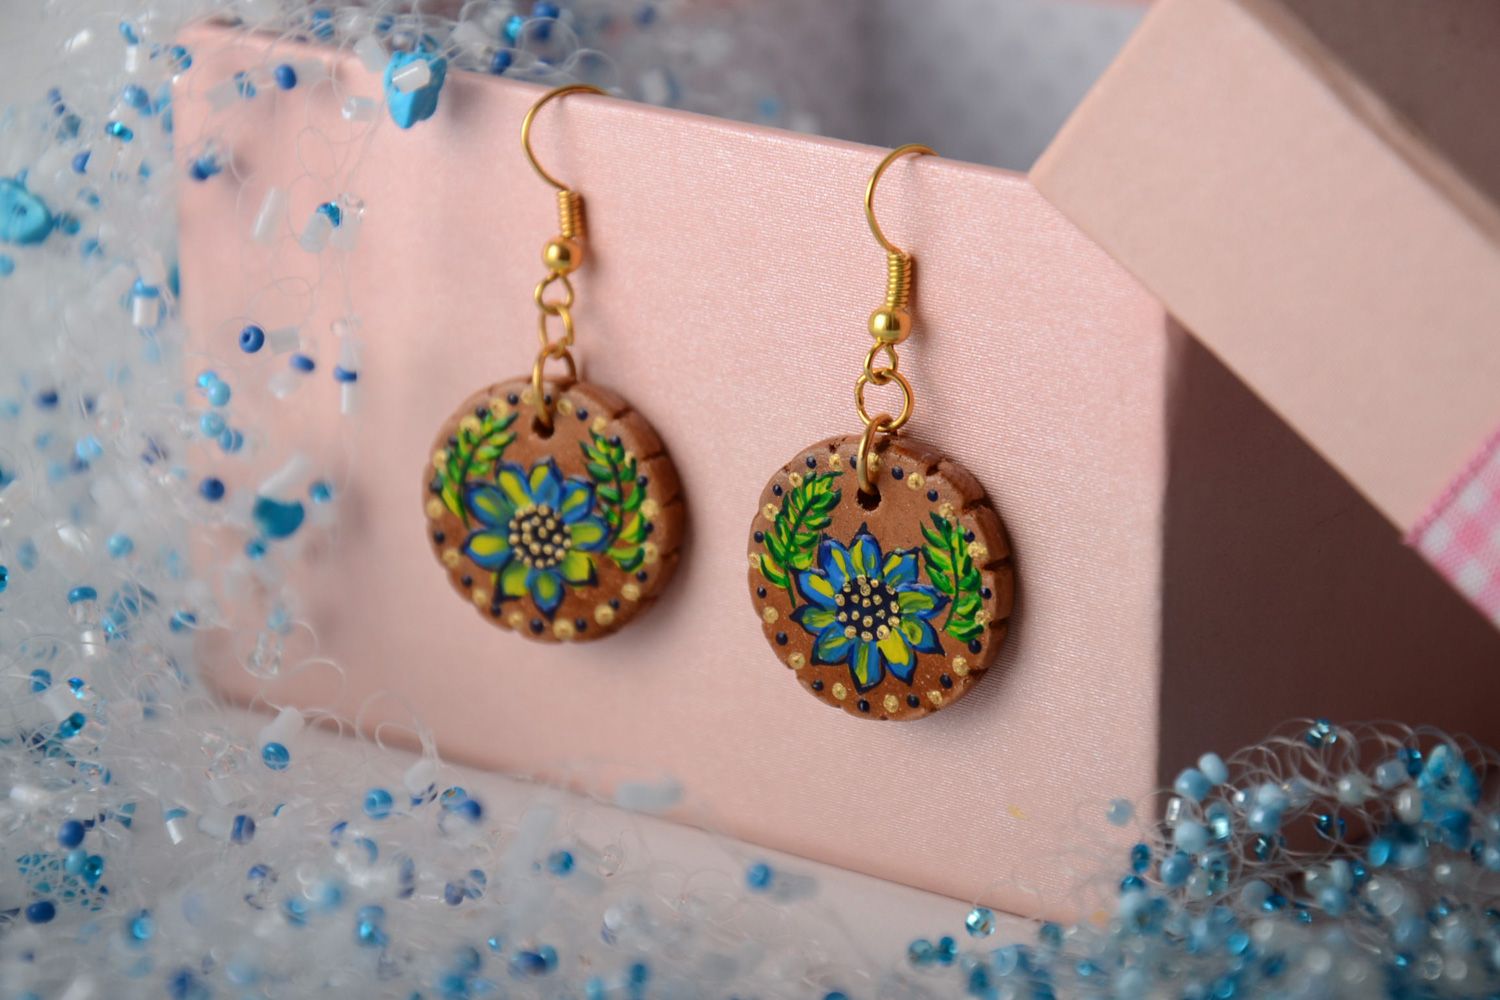 Handmade festive round ceramic earrings painted with acrylics in ethnic style photo 1